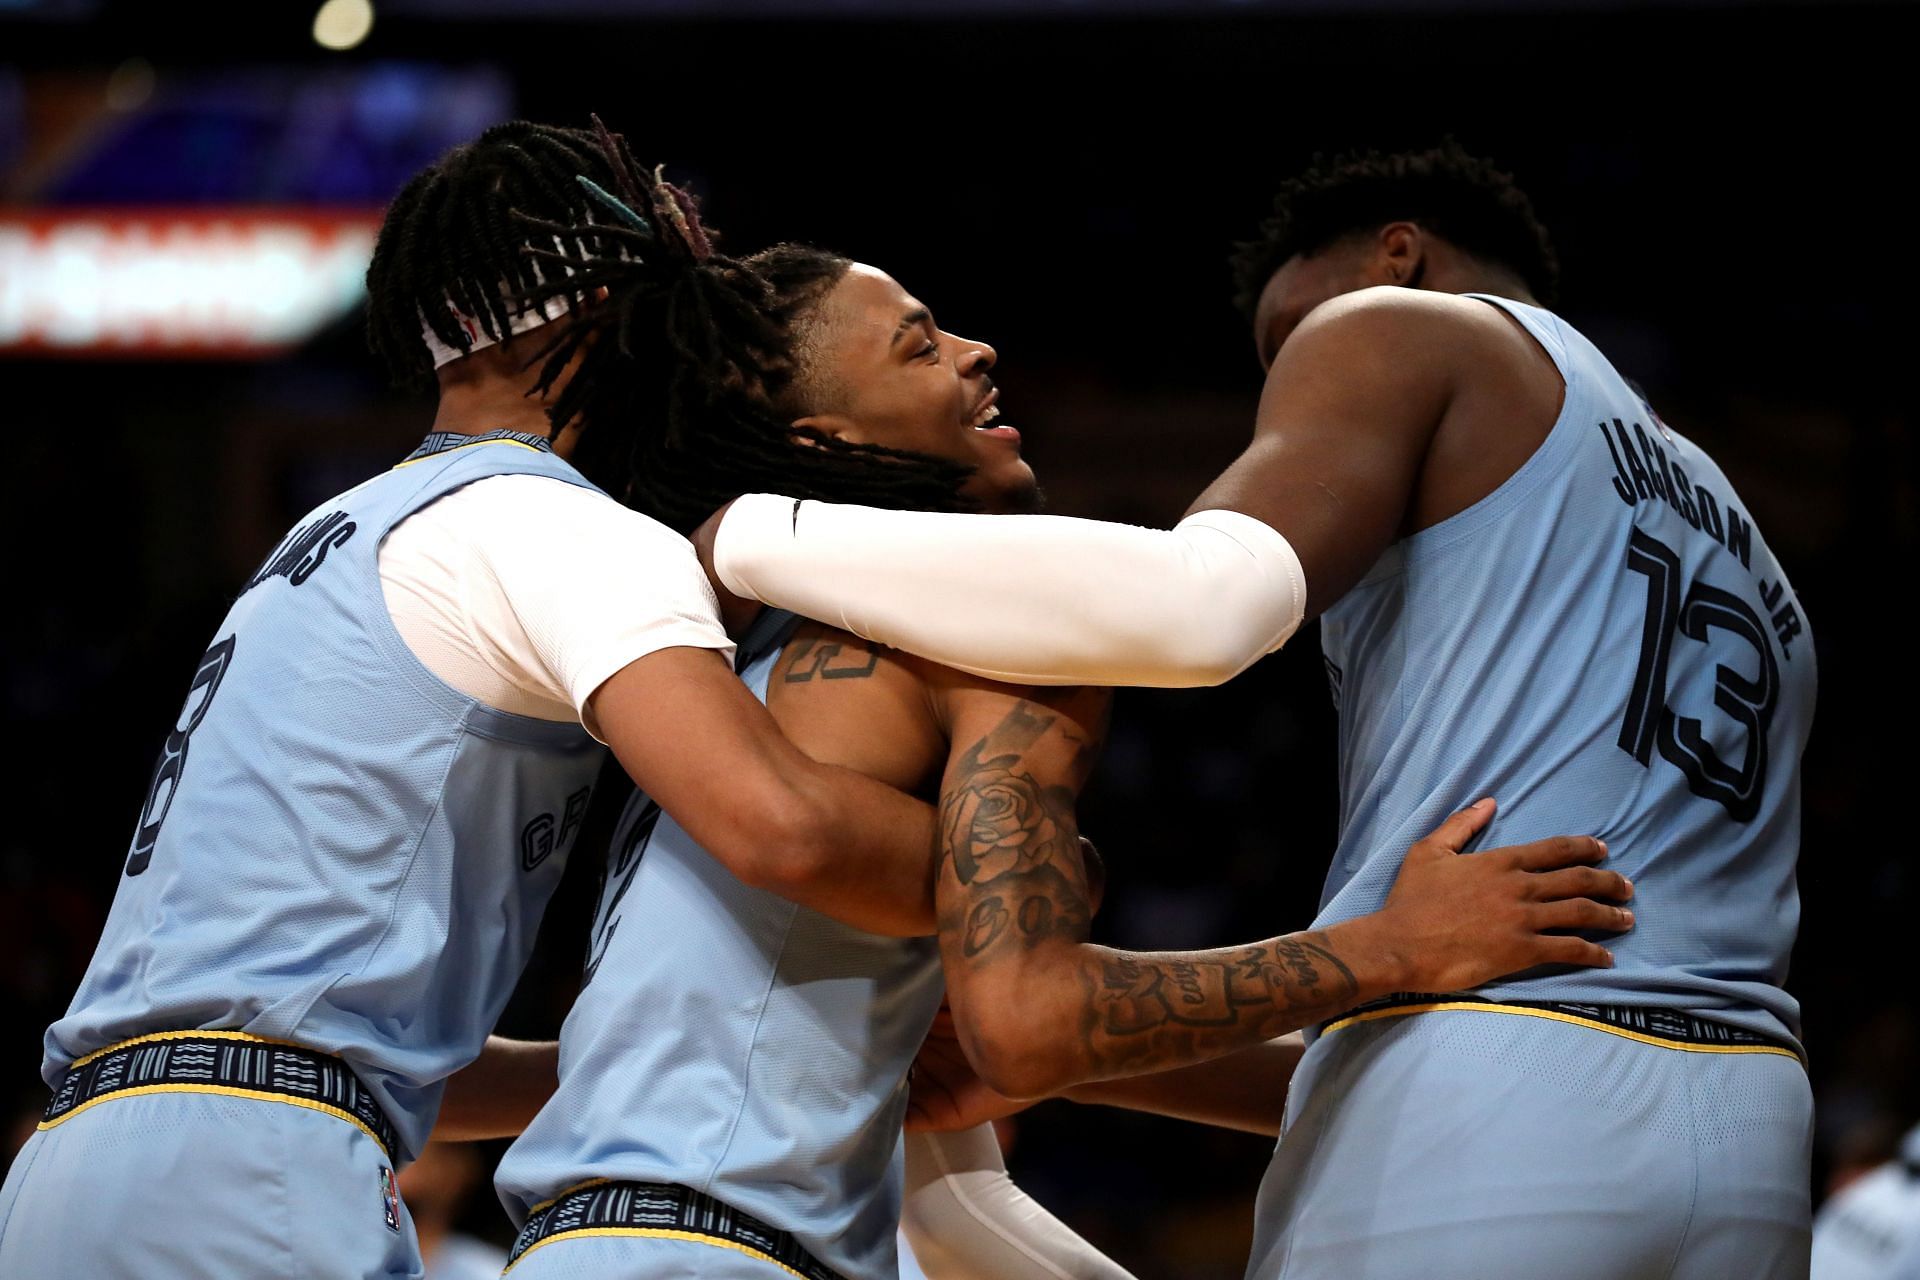 Ja Morant of the Memphis Grizzlies celebrates a basket with Ziaire Williams, left, and Jaren Jackson Jr., right, during the third quarter against the LA Lakers on Sunday in Los Angeles, California.